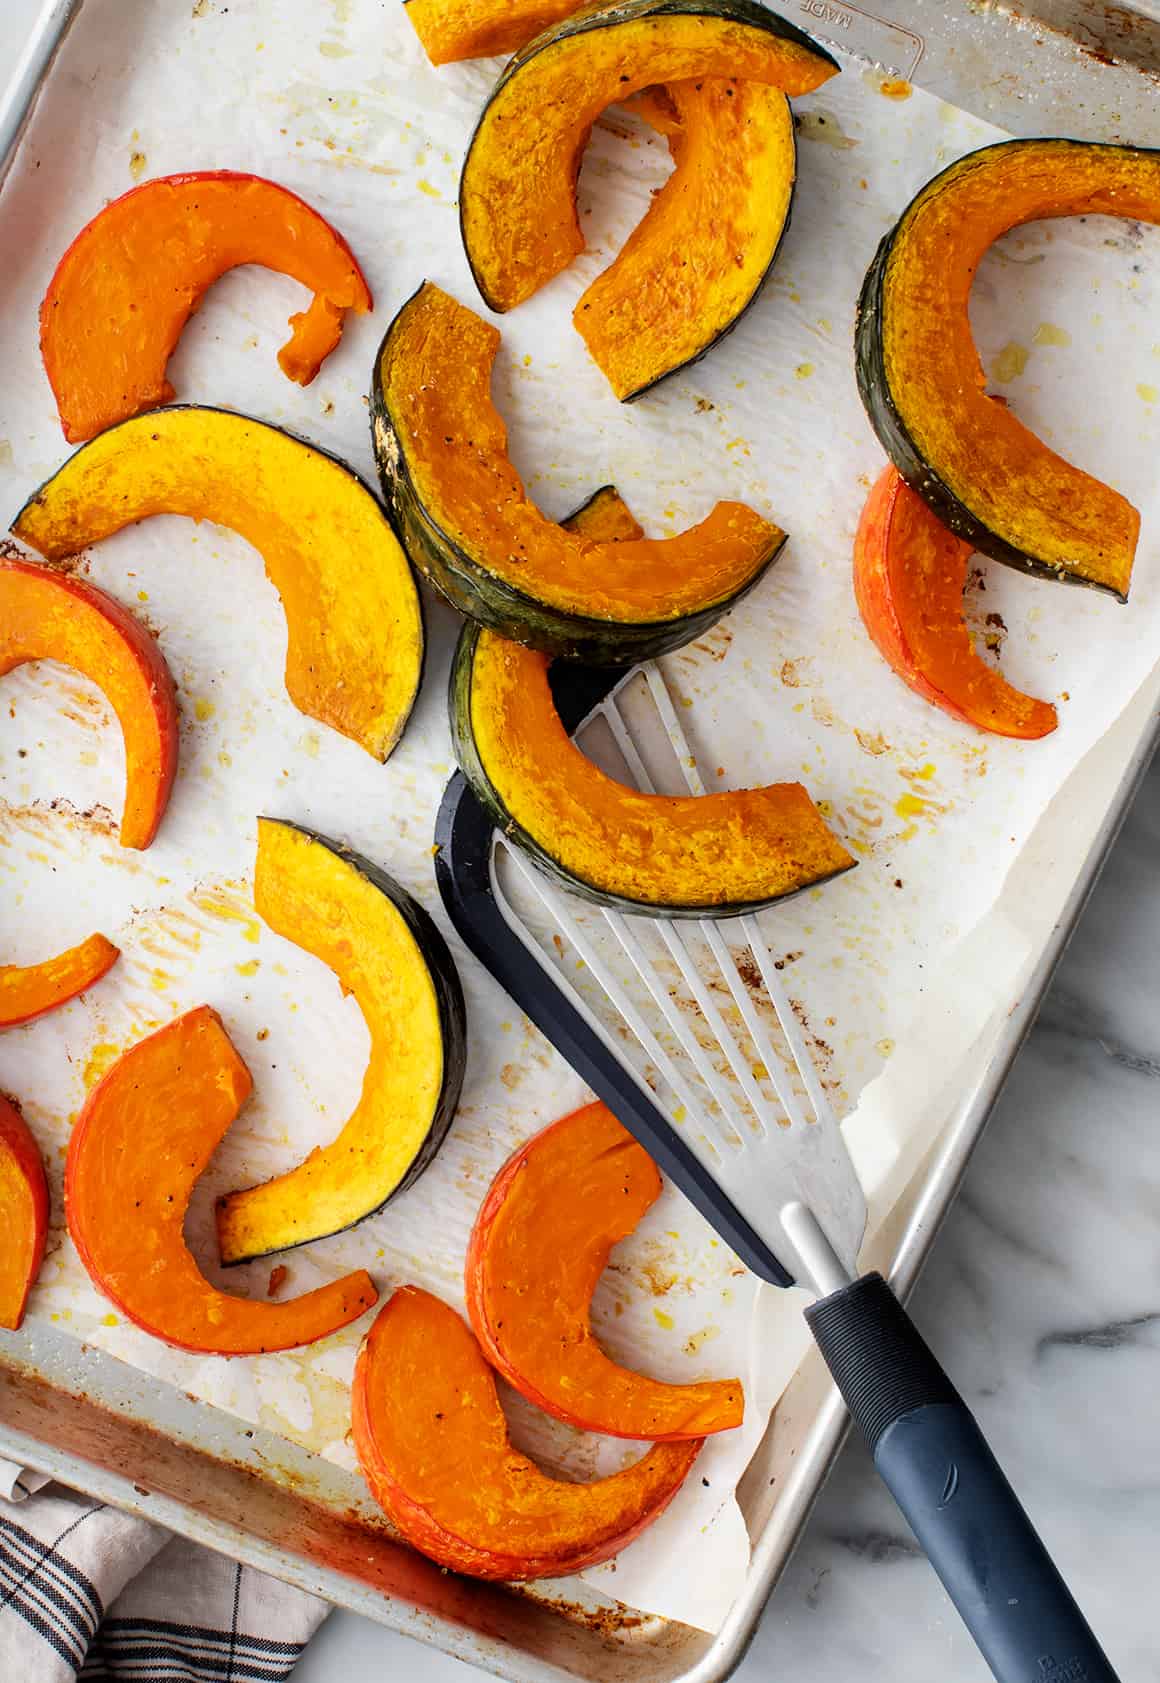 Grilled kabocha squash on a baking tray with a spoon